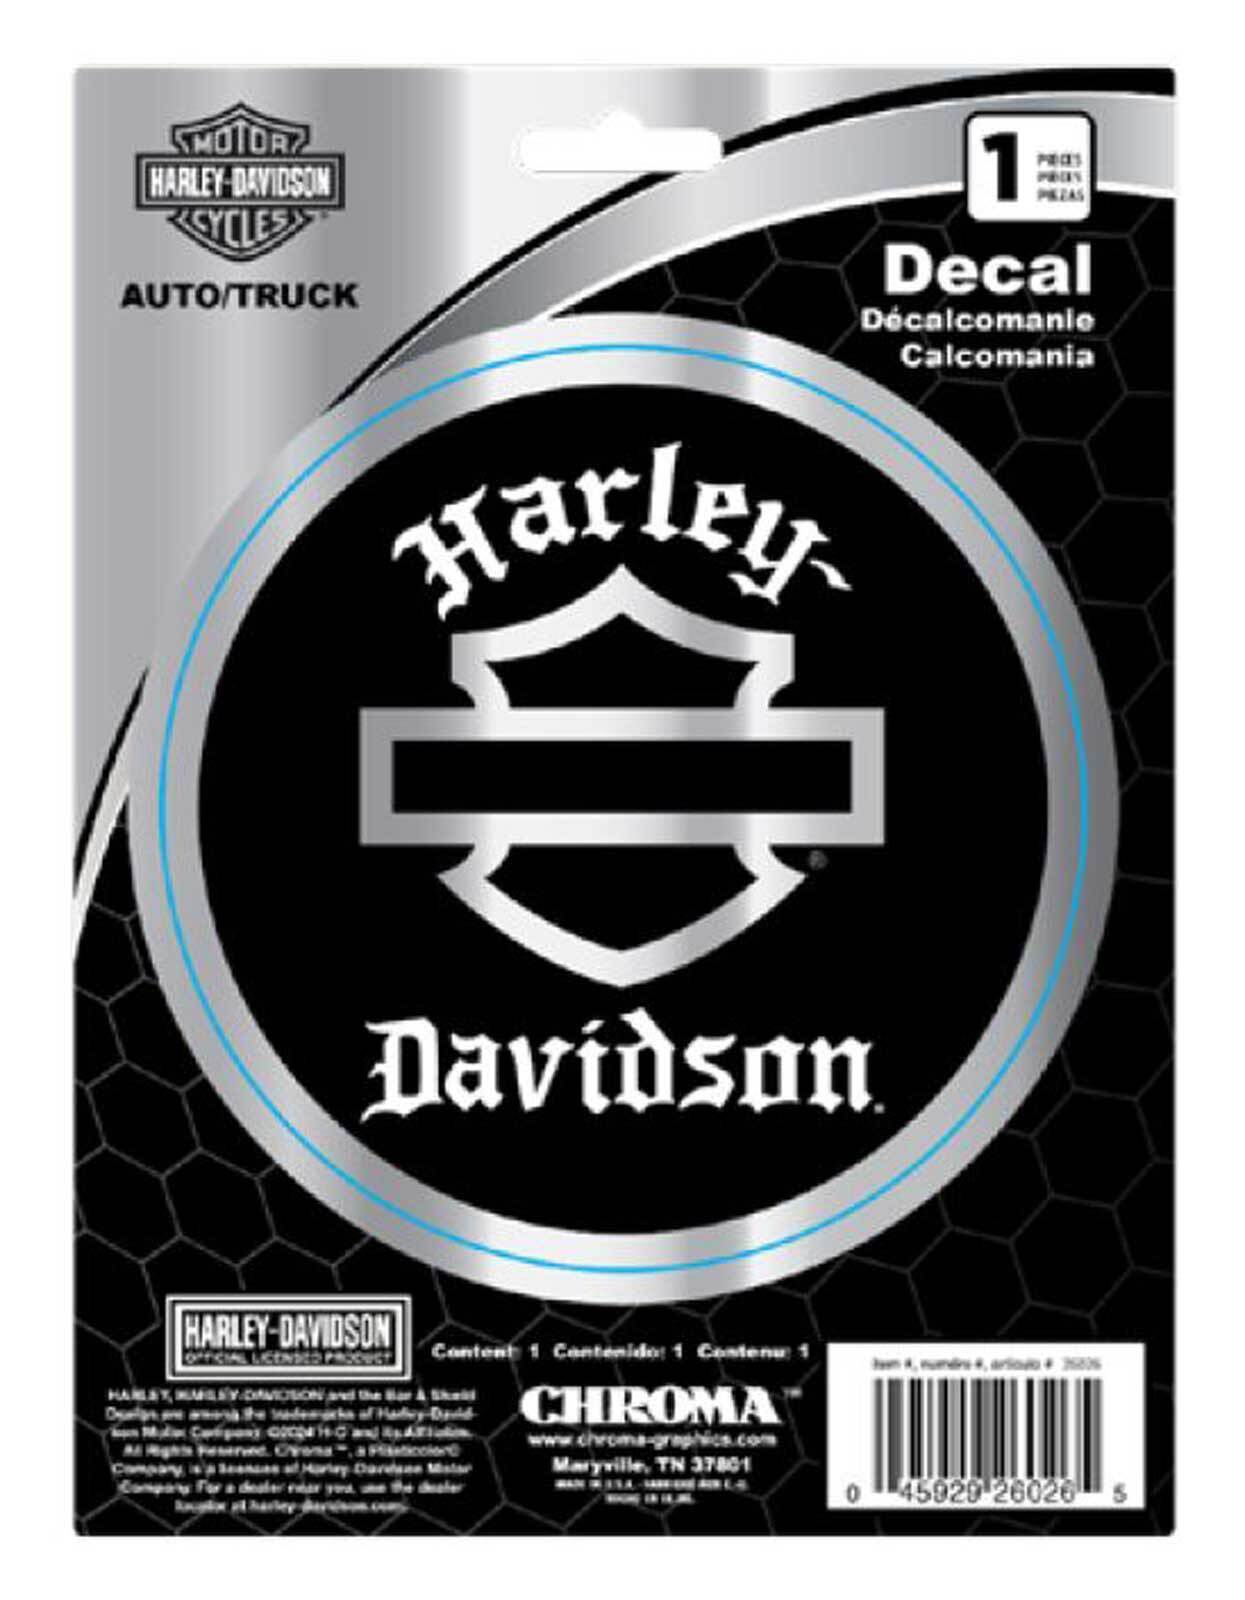 Harley-Davidson Silhouette Old English Chrome Vinyl Decal - Black - 6 x 8 in.